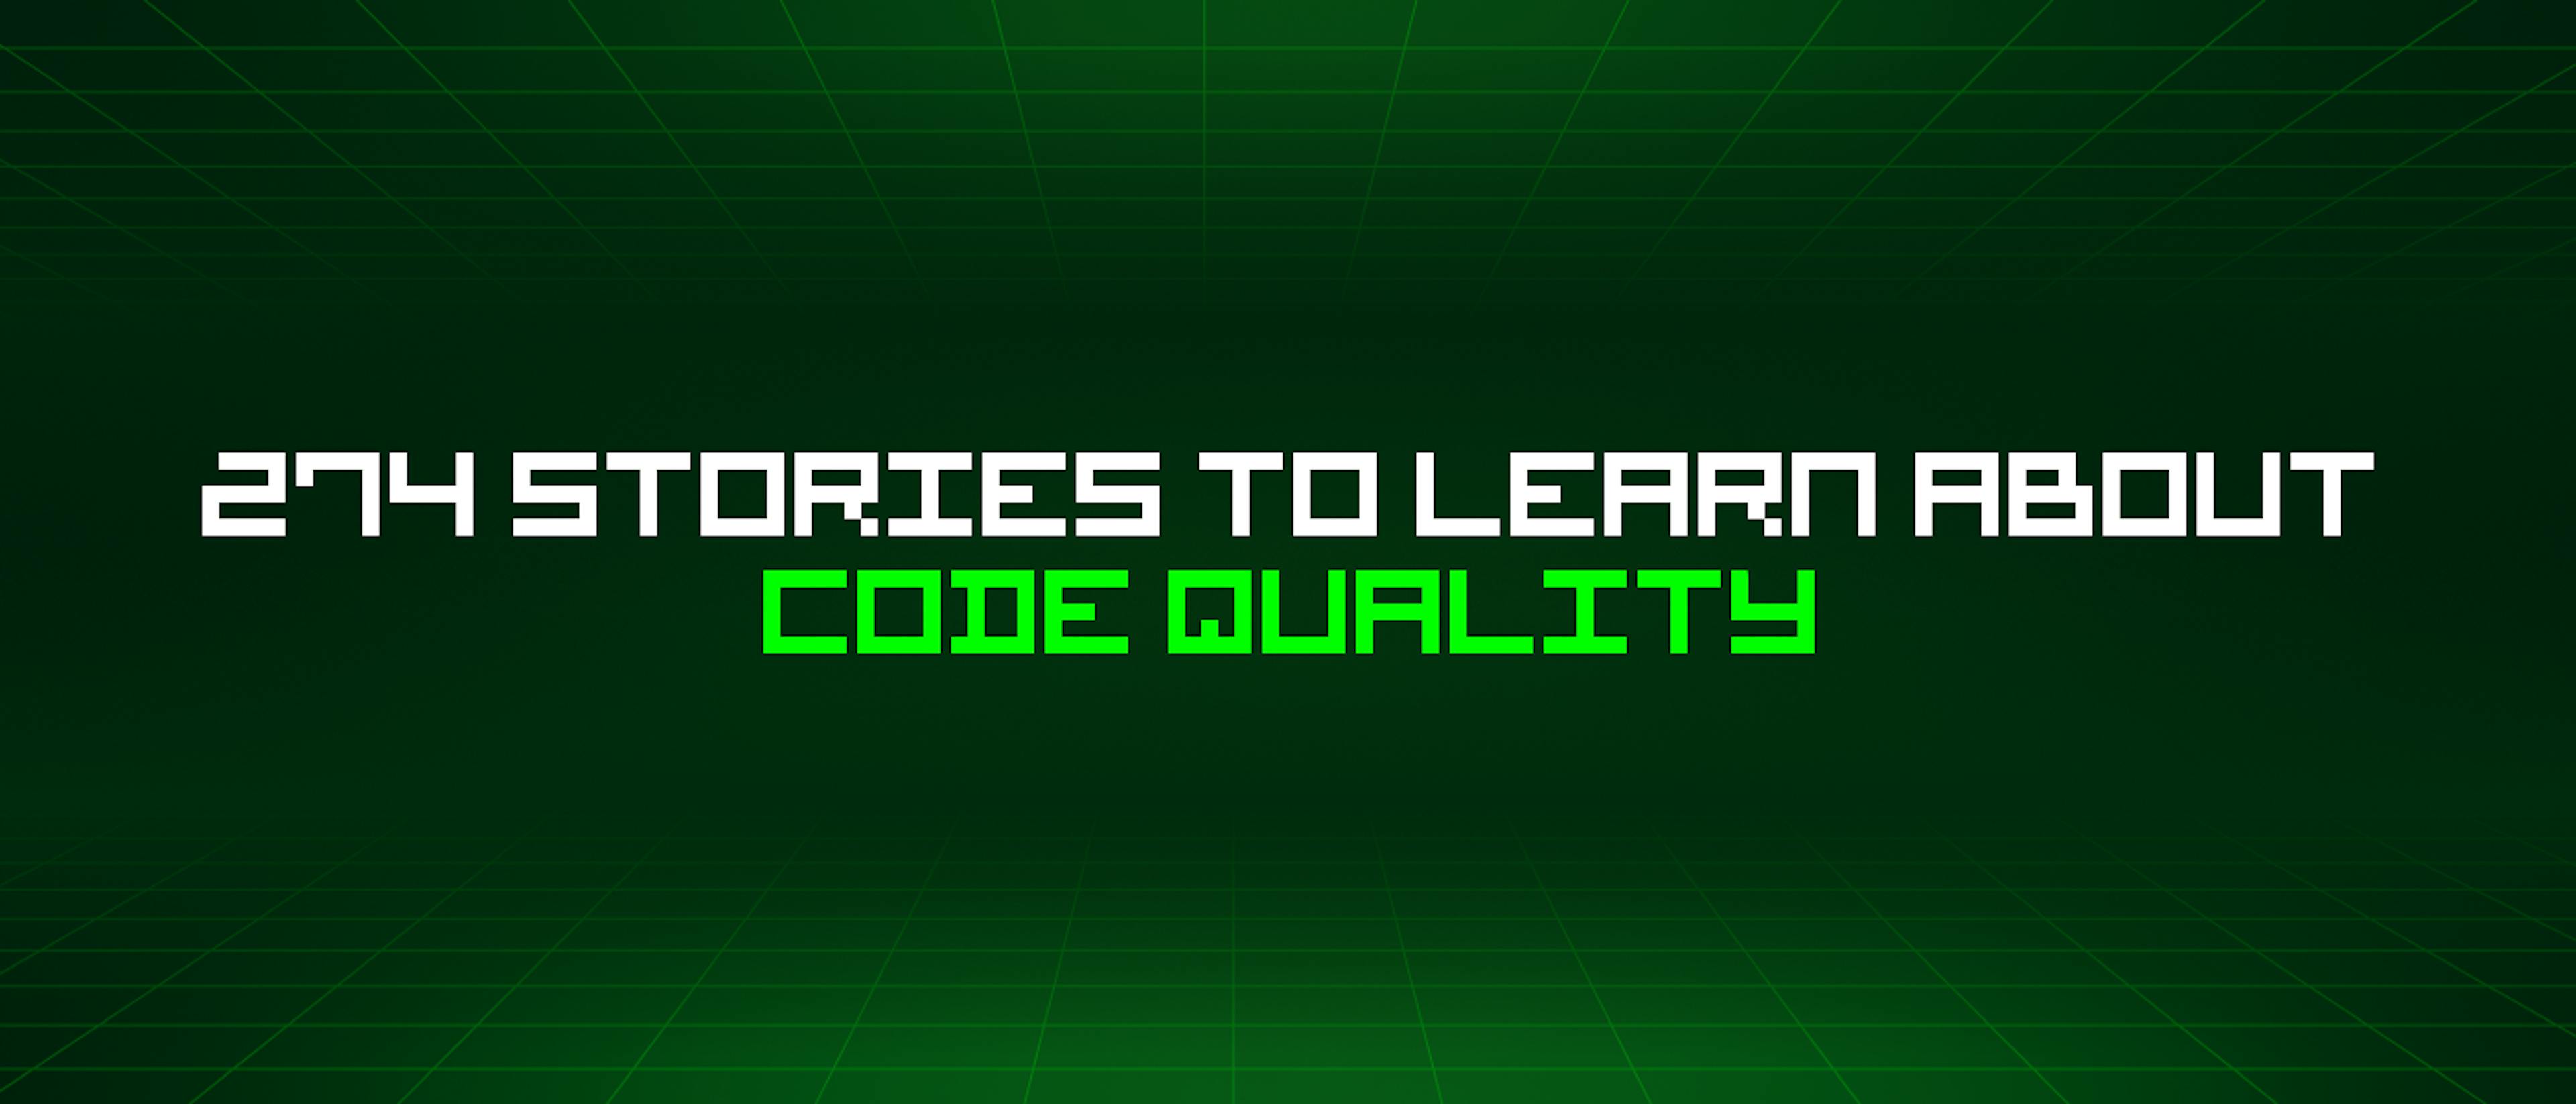 featured image - 274 Stories To Learn About Code Quality